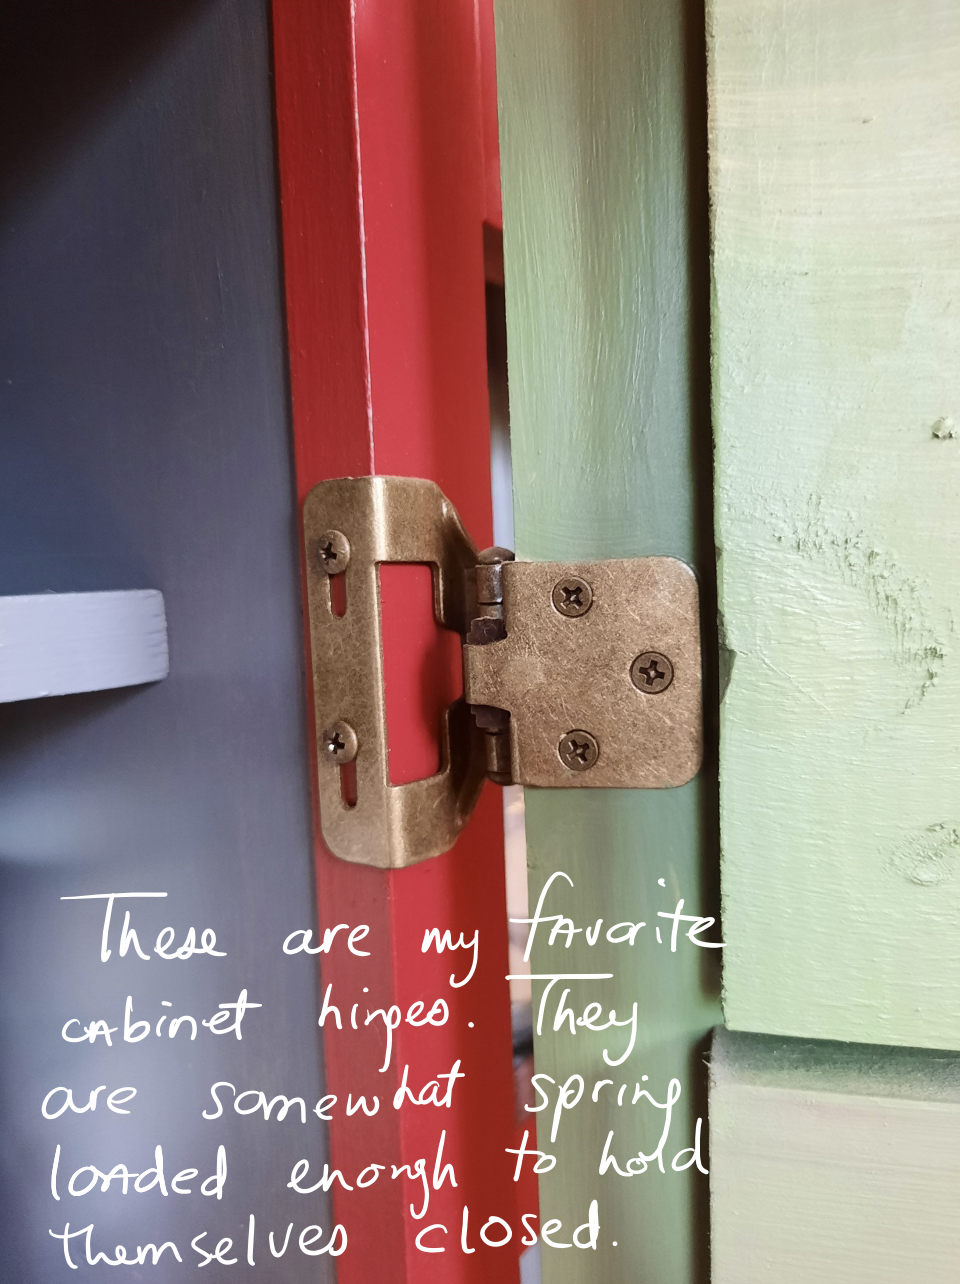 Text on image: These are my favorite cabinet hinges. They are somewhat spring loaded enough to hold themselves closed.